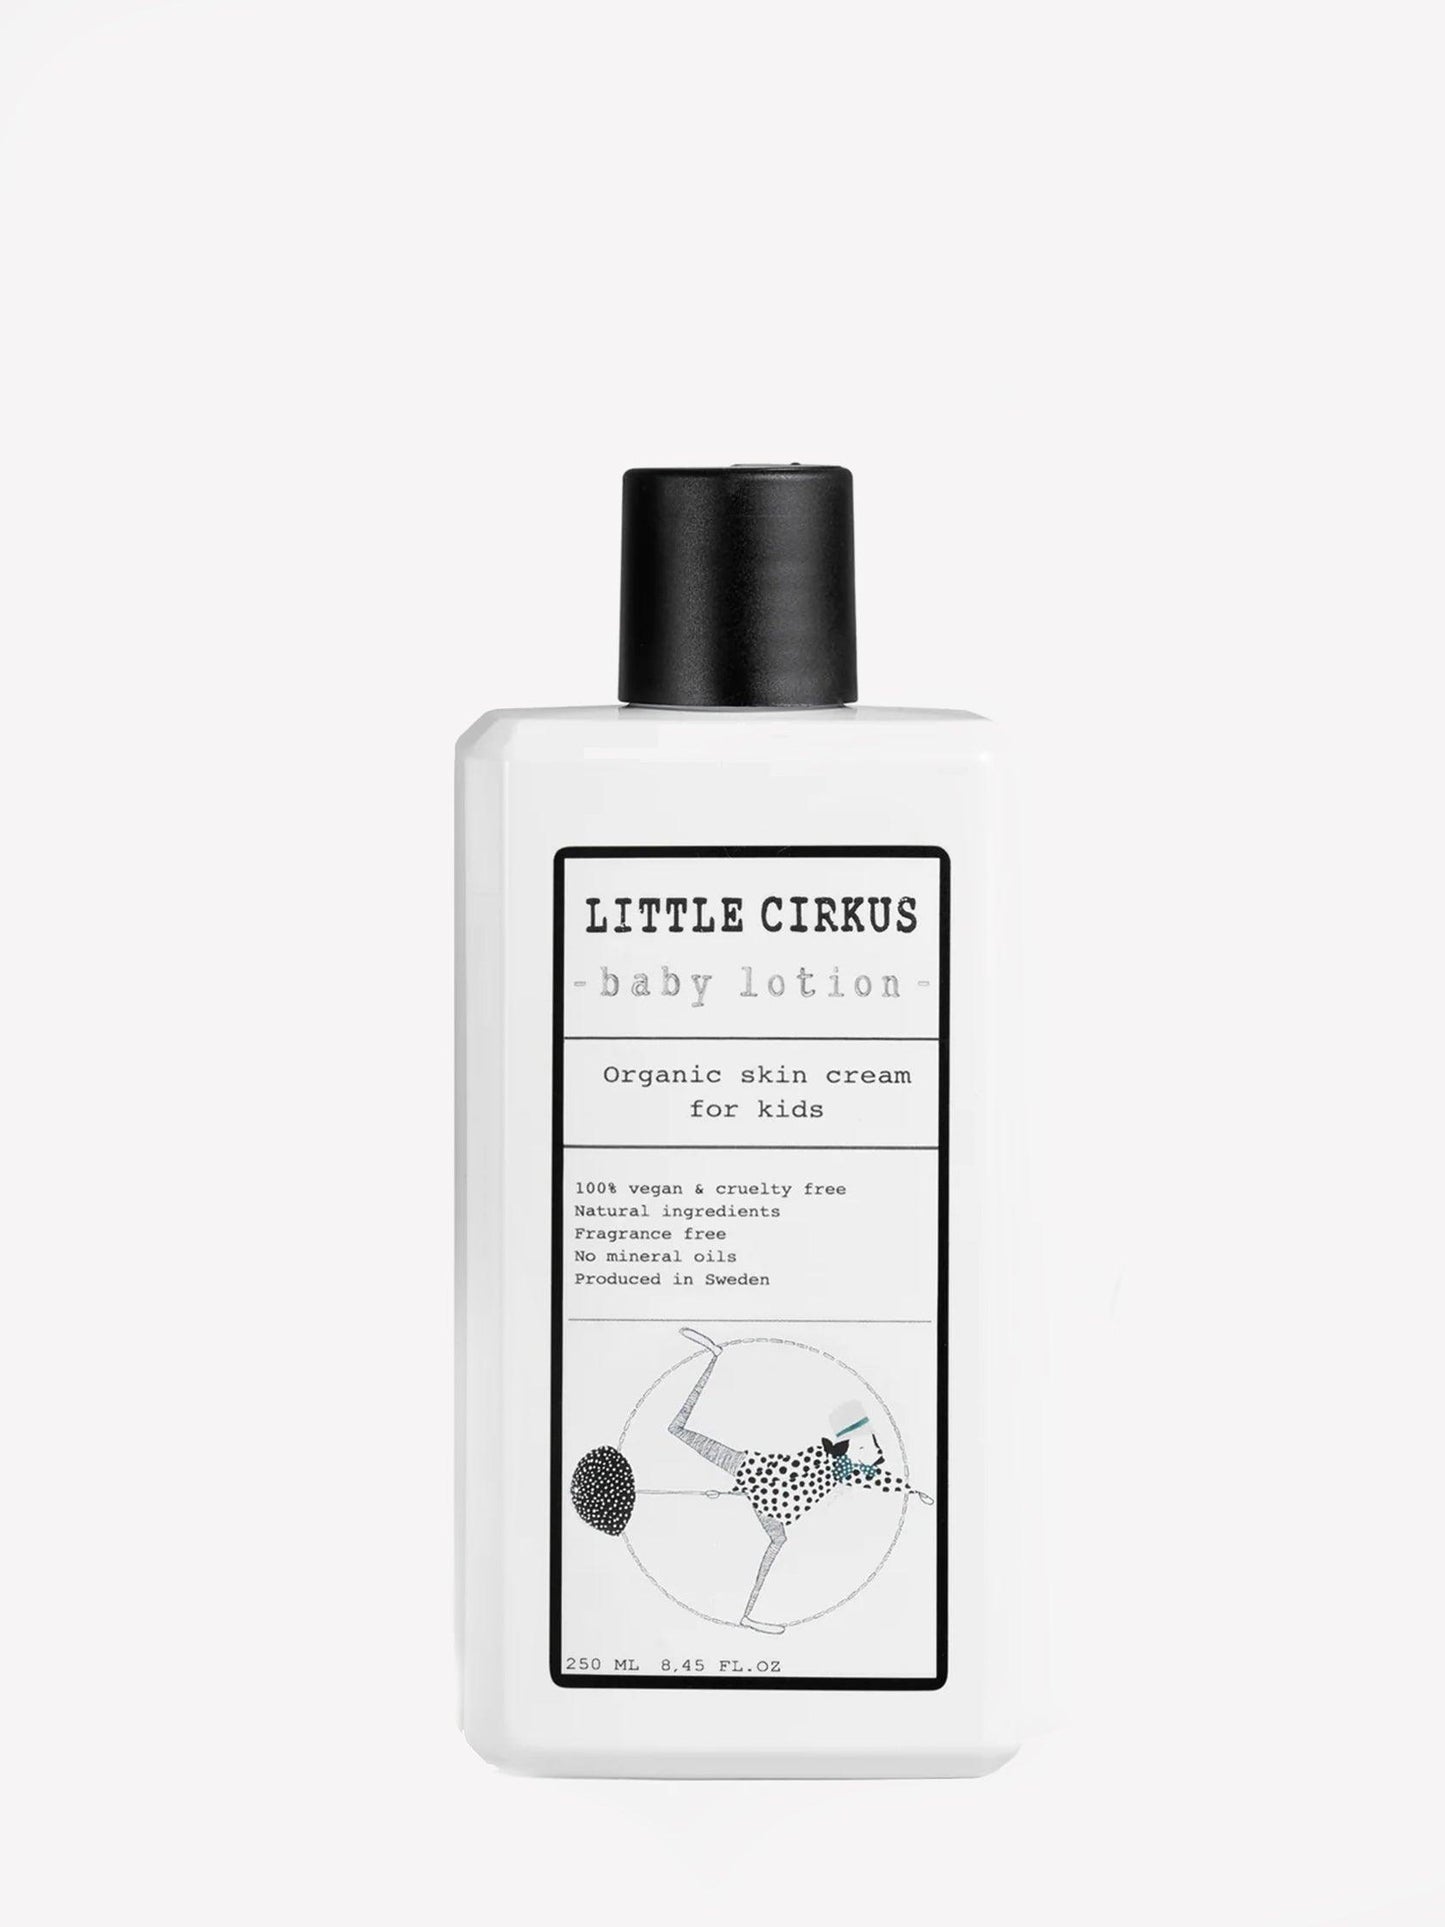 Little Circus - Baby Lotion